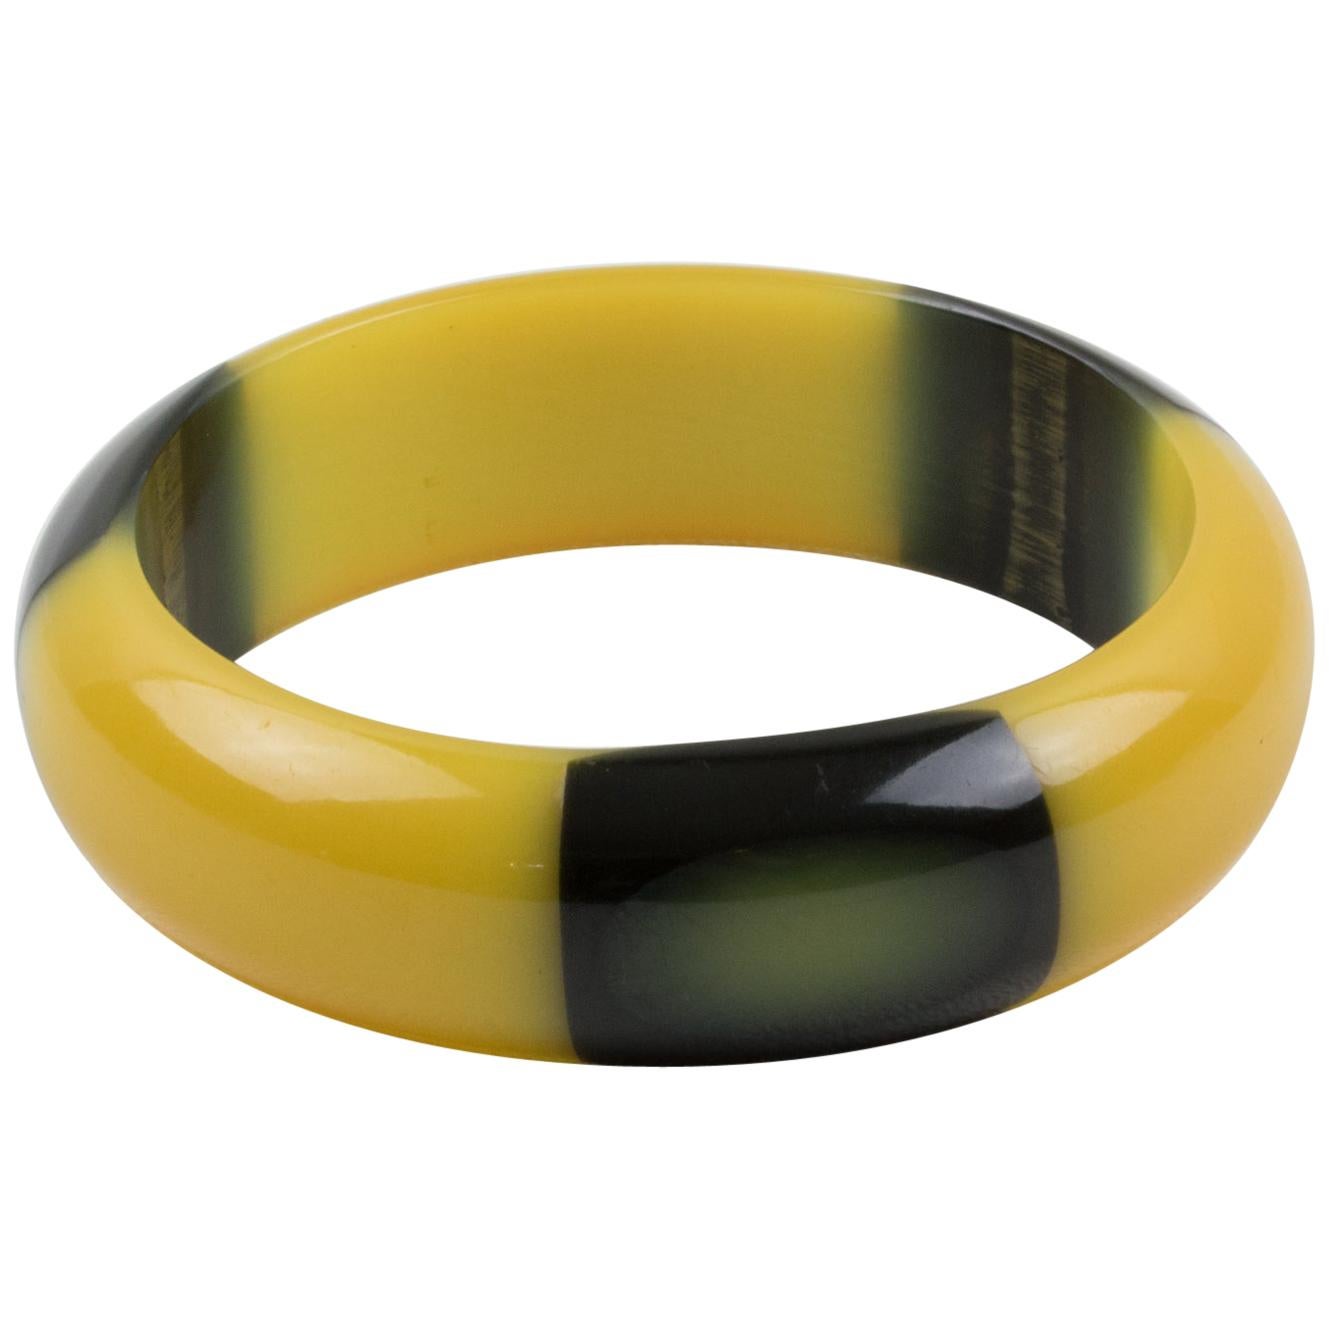 This piece is an outstanding Belle Kogan Bakelite elongated inlay dot bracelet bangle. The dots are set with a true licorice black surrounding color, in a light banana yellow color, and appear three times around the bangle. The bracelet has a domed